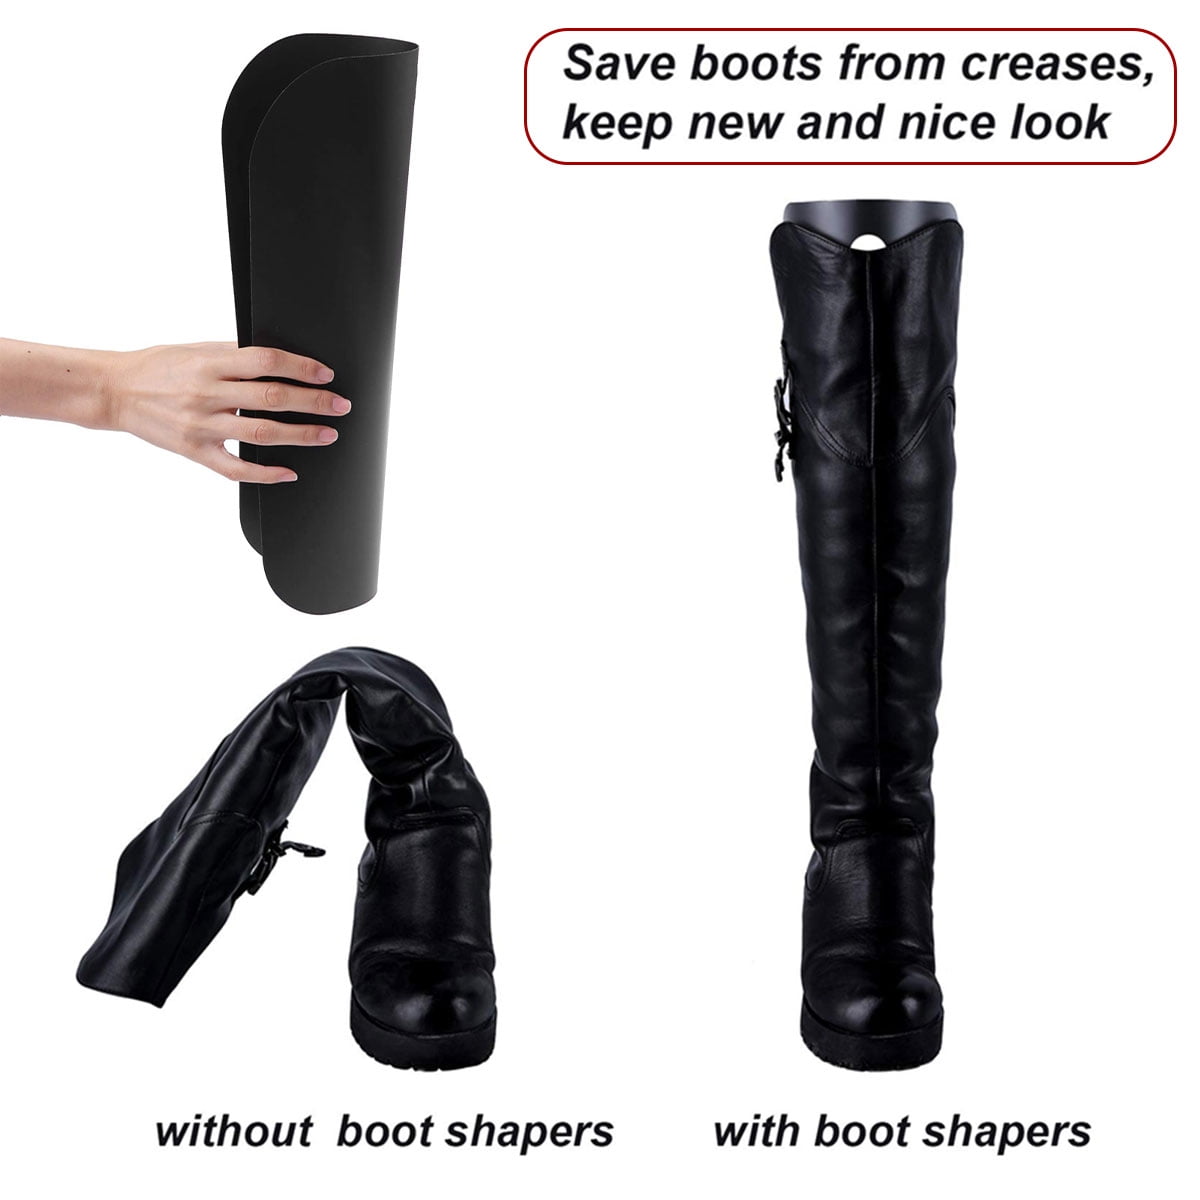 8 Pieces For 4 Pairs Of Boots TOOGOO Boot Shaper Form Inserts Tall Boot Support For Women And Men 12 Inch, 14 Inch And 16 Inch, Black 